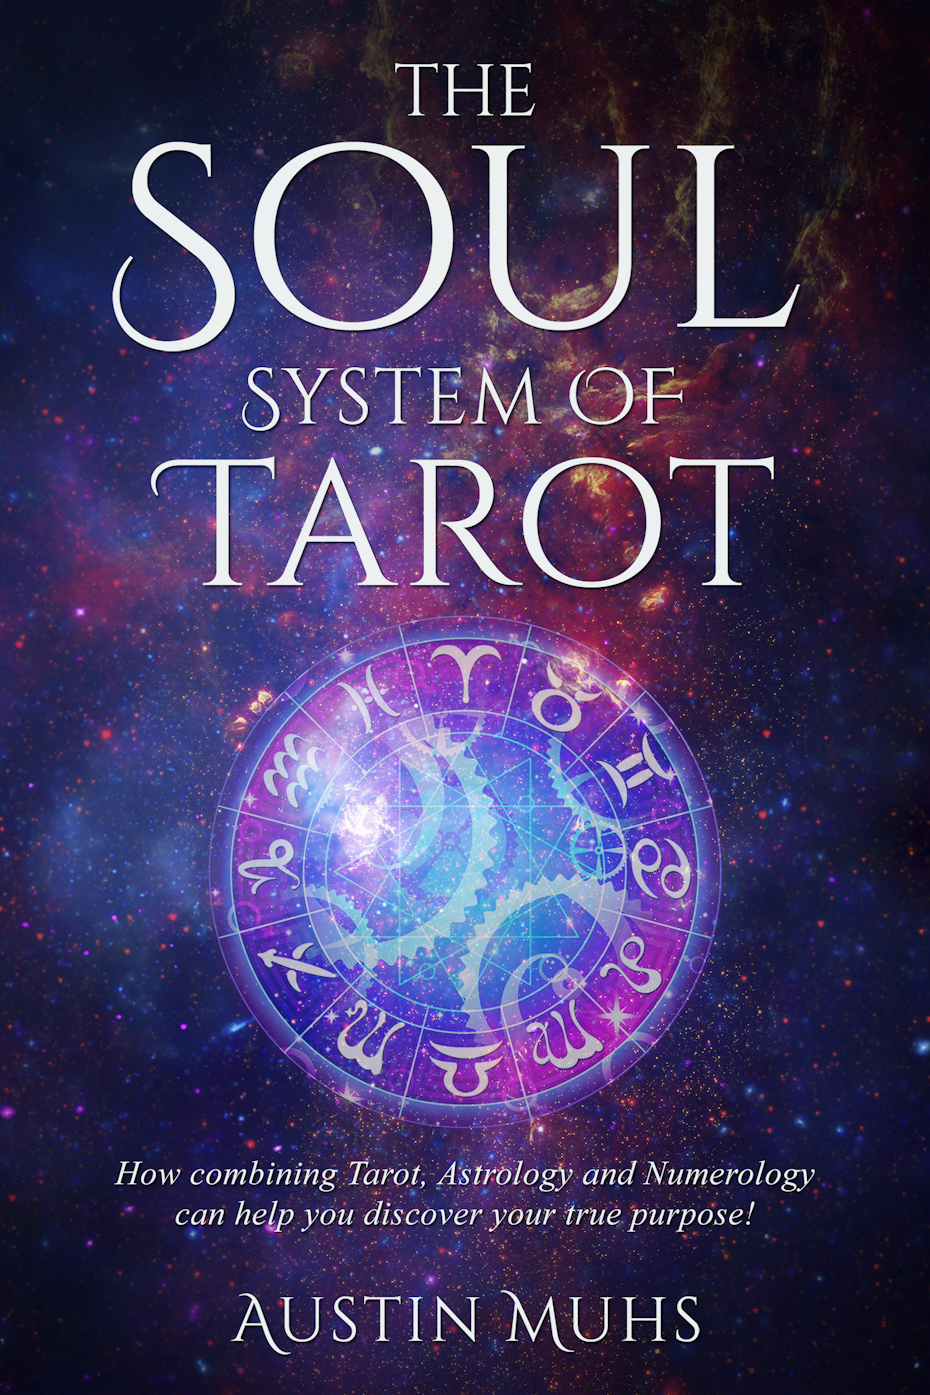 Blue, purple and pink book cover showing the wheel of the zodiac